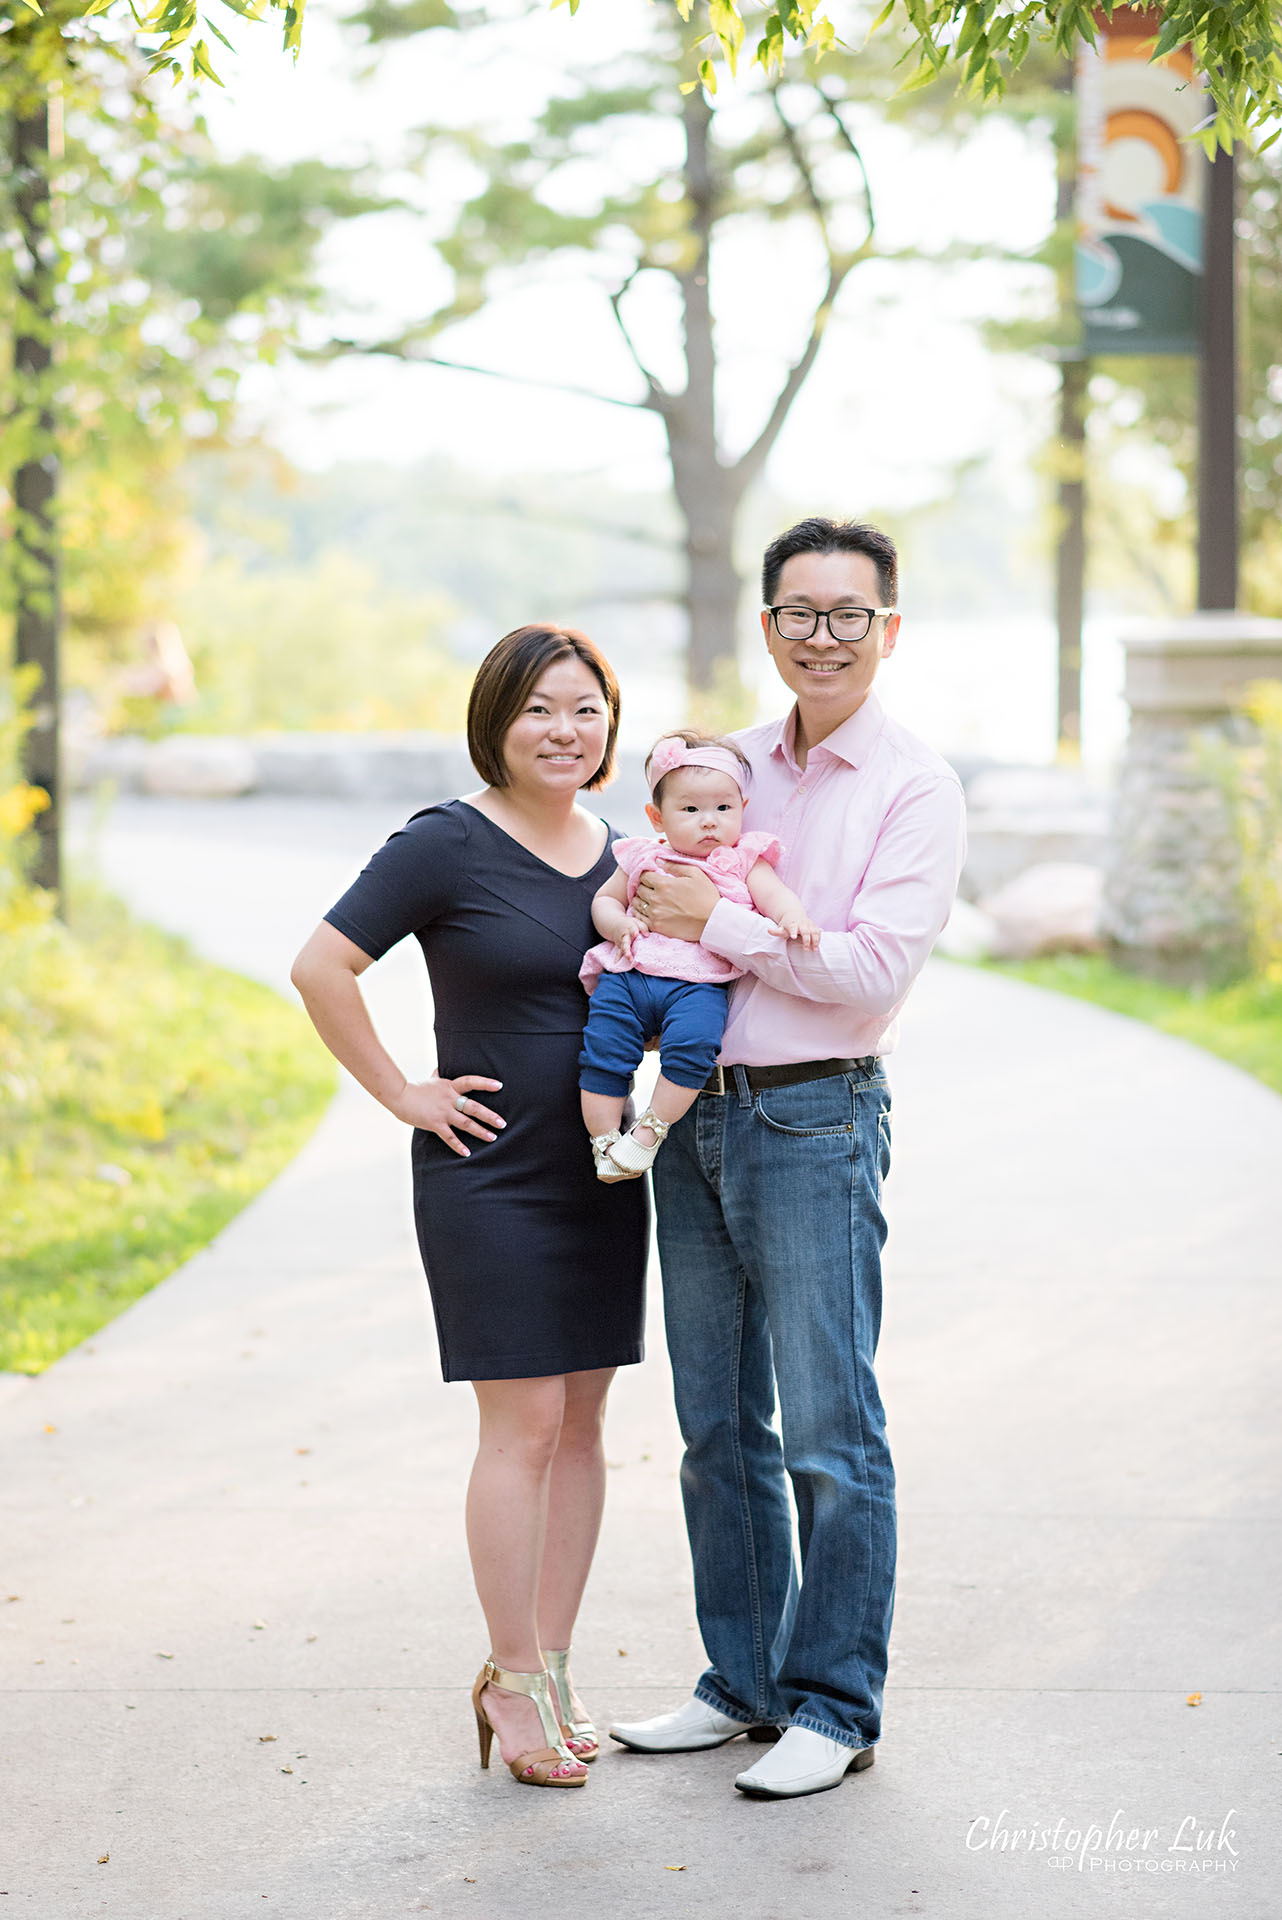 Christopher Luk Toronto Photographer Lake Wilcox Park Family Baby Newborn Richmond Hill Session Mother Mom Father Dad Husband Wife Daughter Sister Baby Hug Hold Portrait